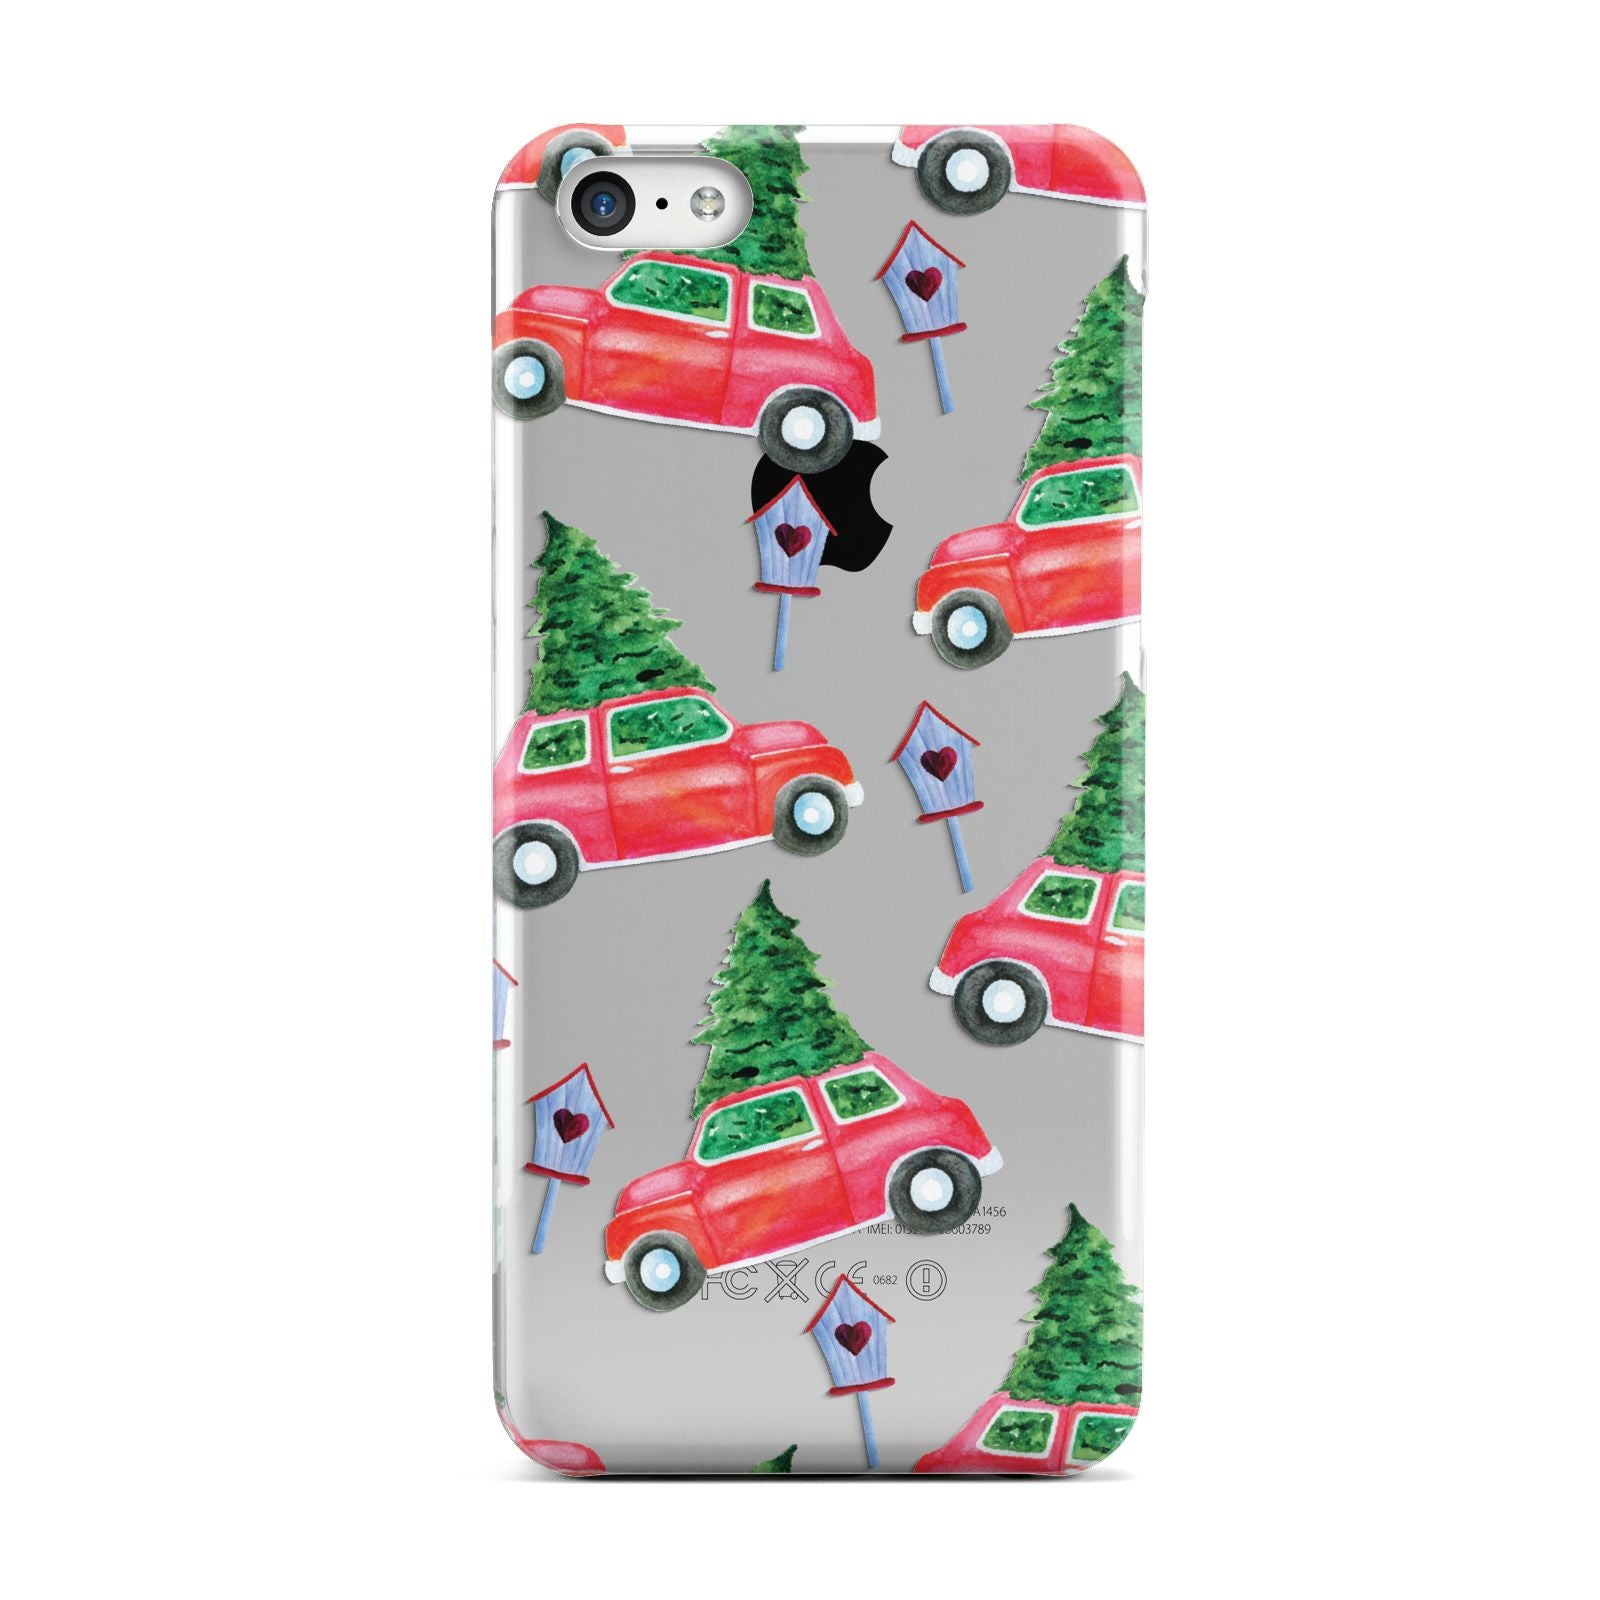 Driving home for Christmas Apple iPhone 5c Case